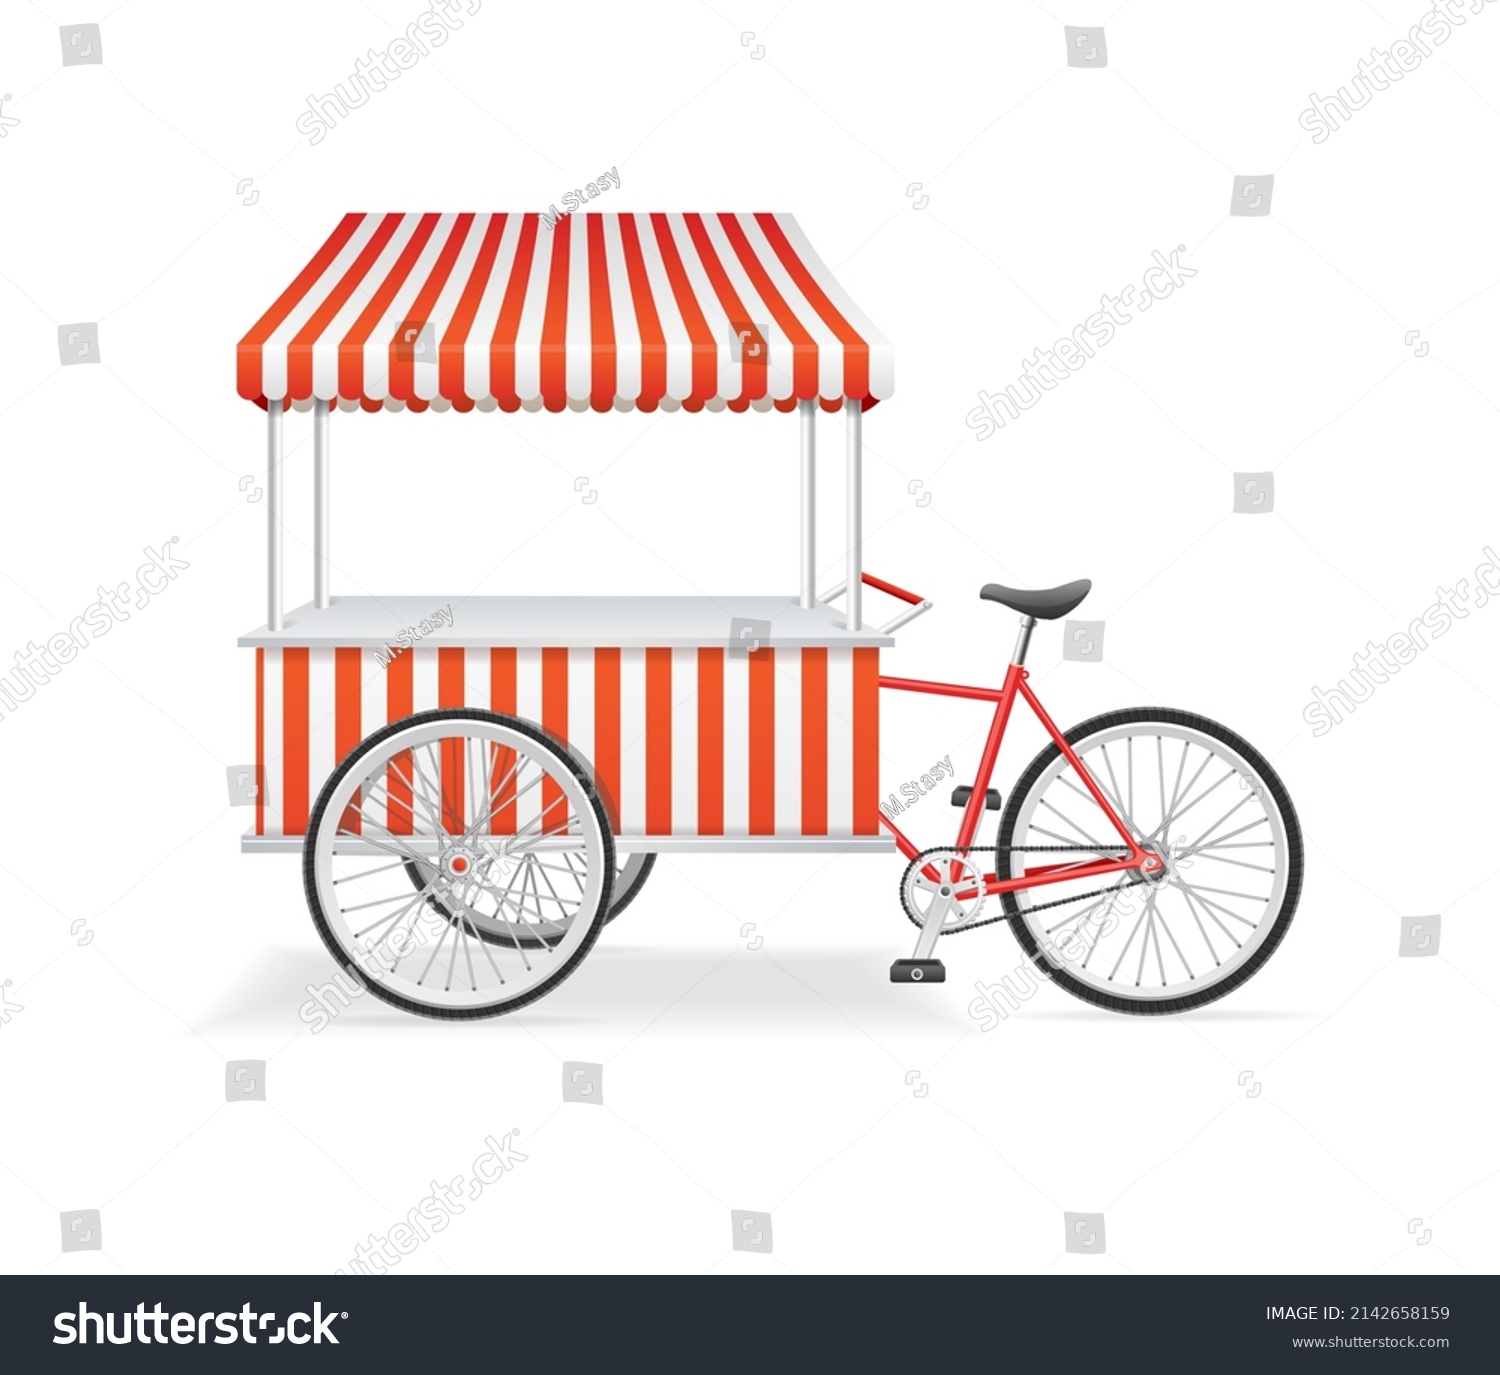 SVG of Realistic Detailed 3d Bike Street Food Cart Trolley Isolated on a White Background. Vector illustration of Bicycle Kiosk Shop svg